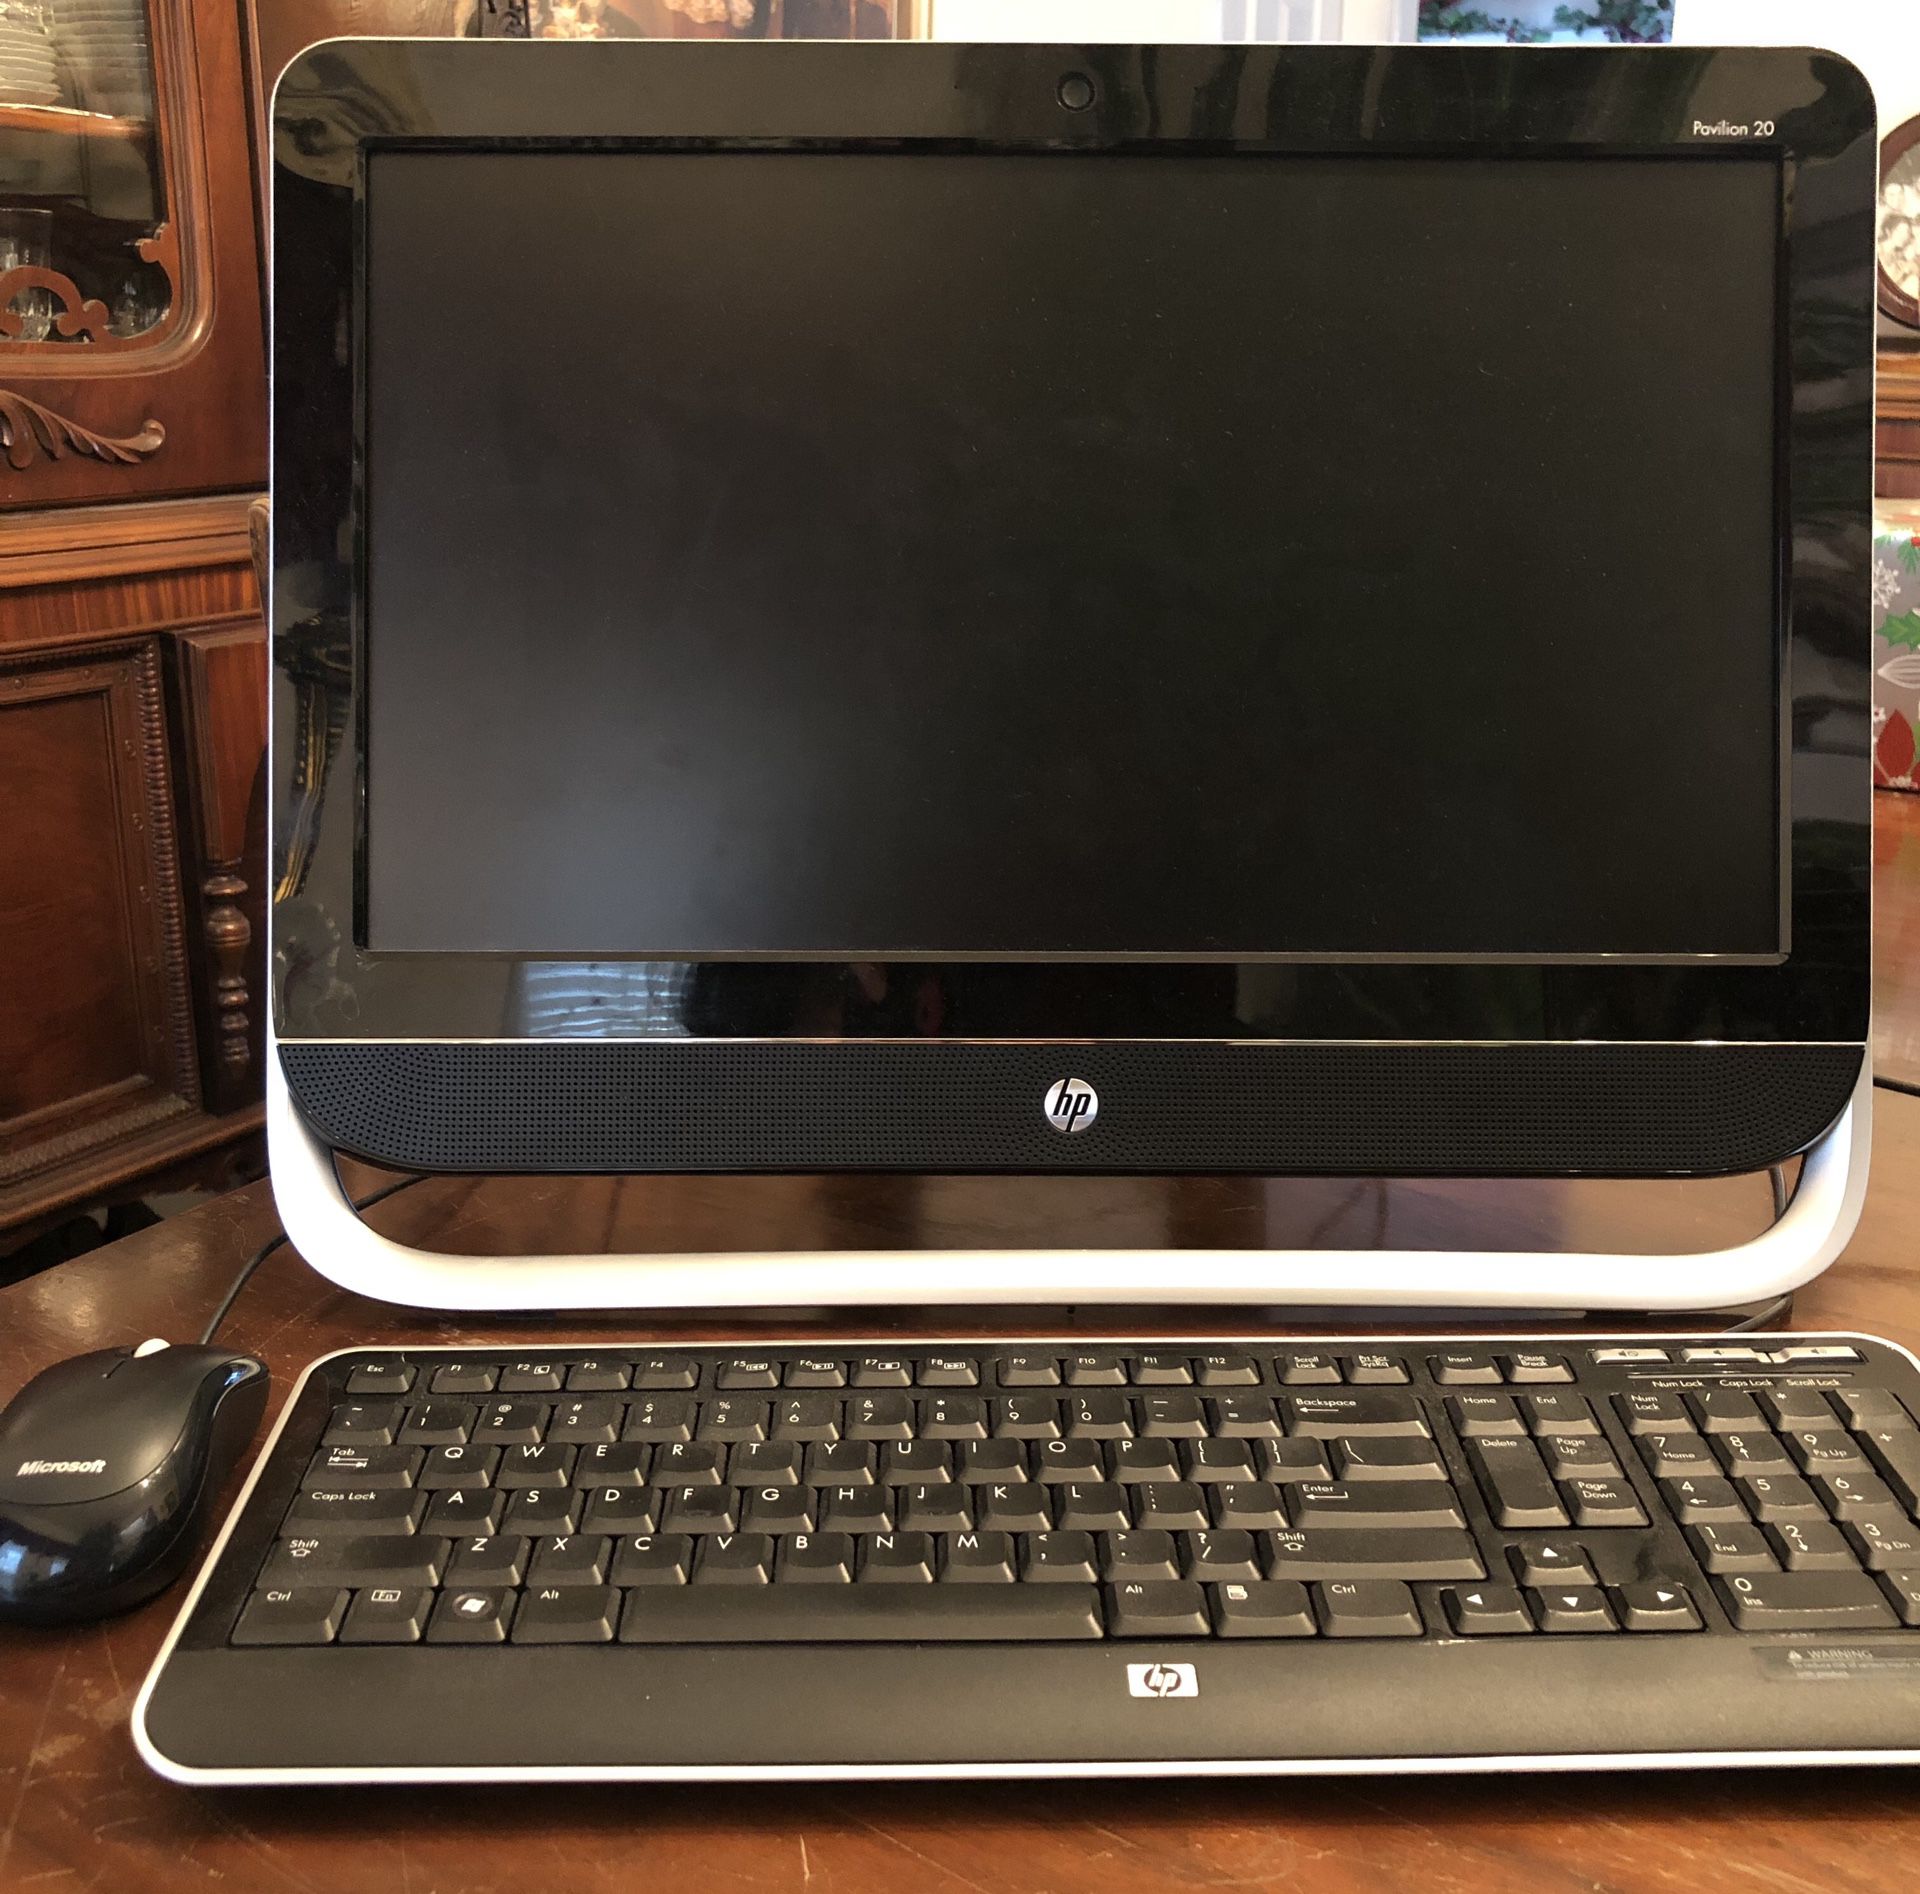 Computer...HP pavilion 20, all-in-one desktop computer